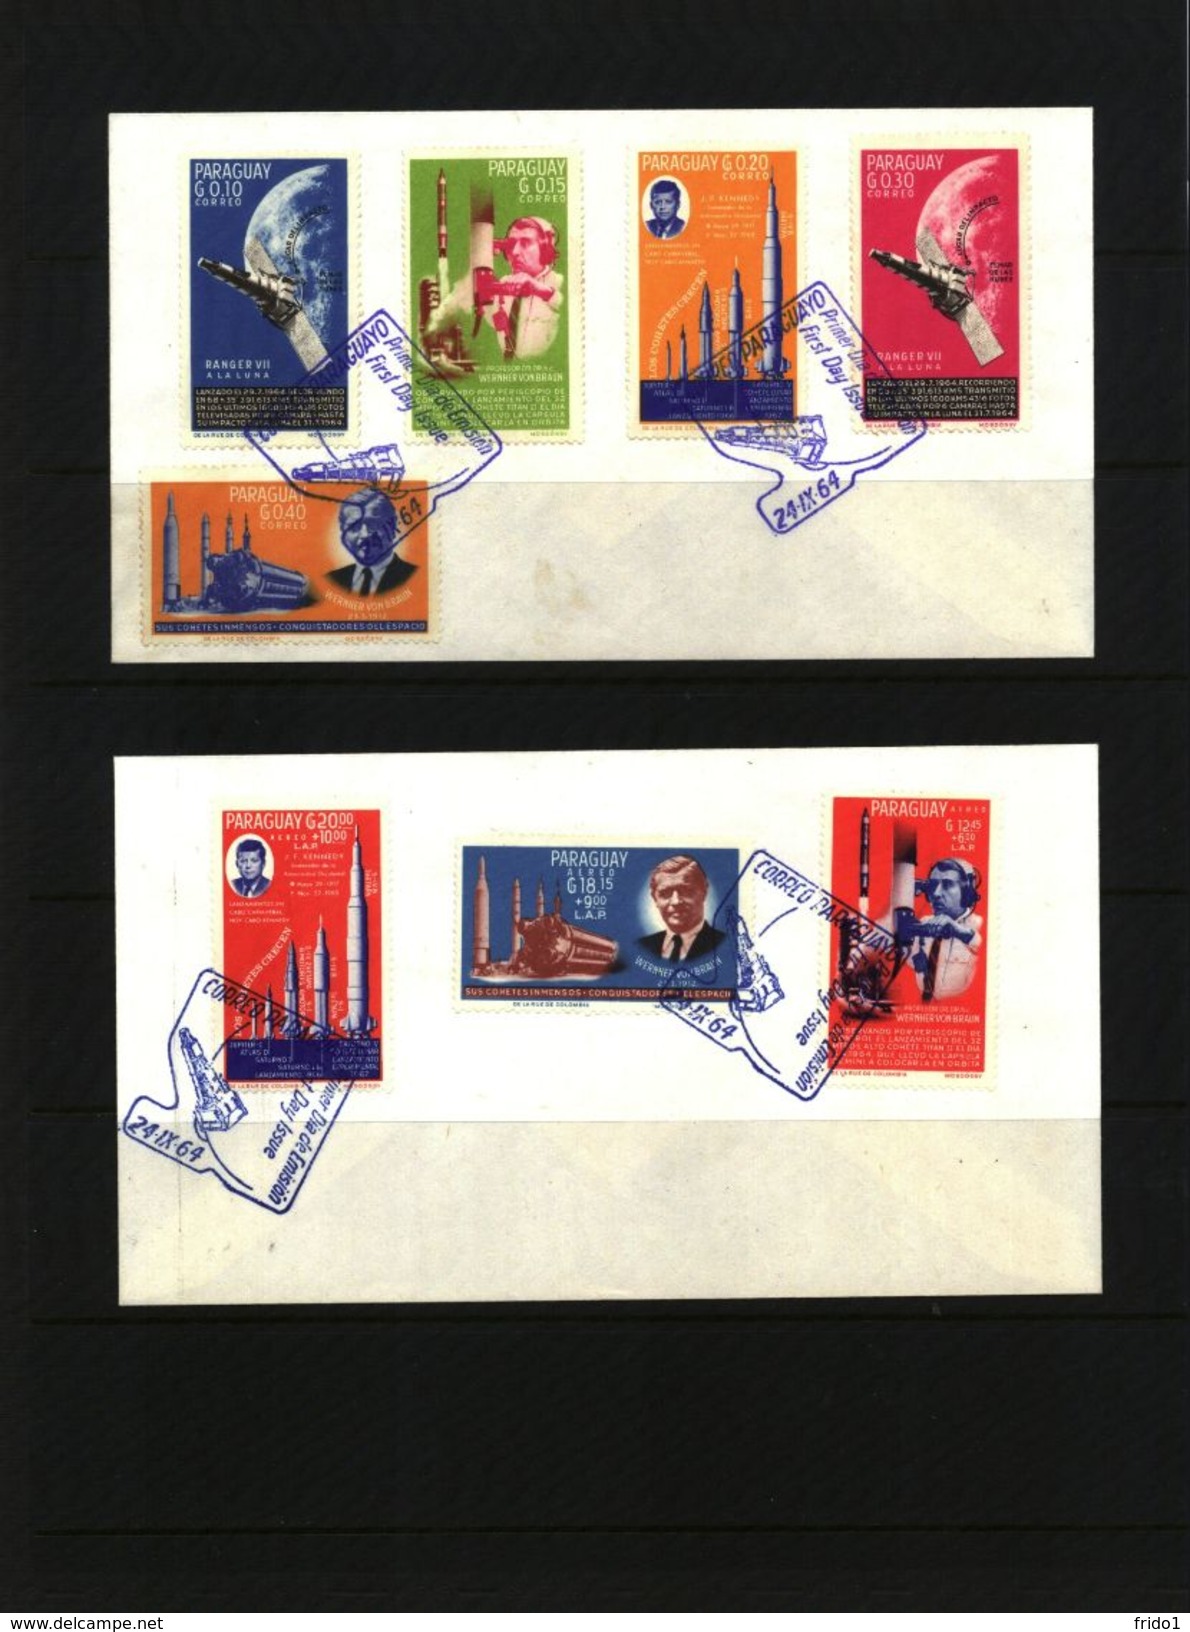 Paraguay Interesting Space / Raumfahrt  Perforated Set FDC - South America